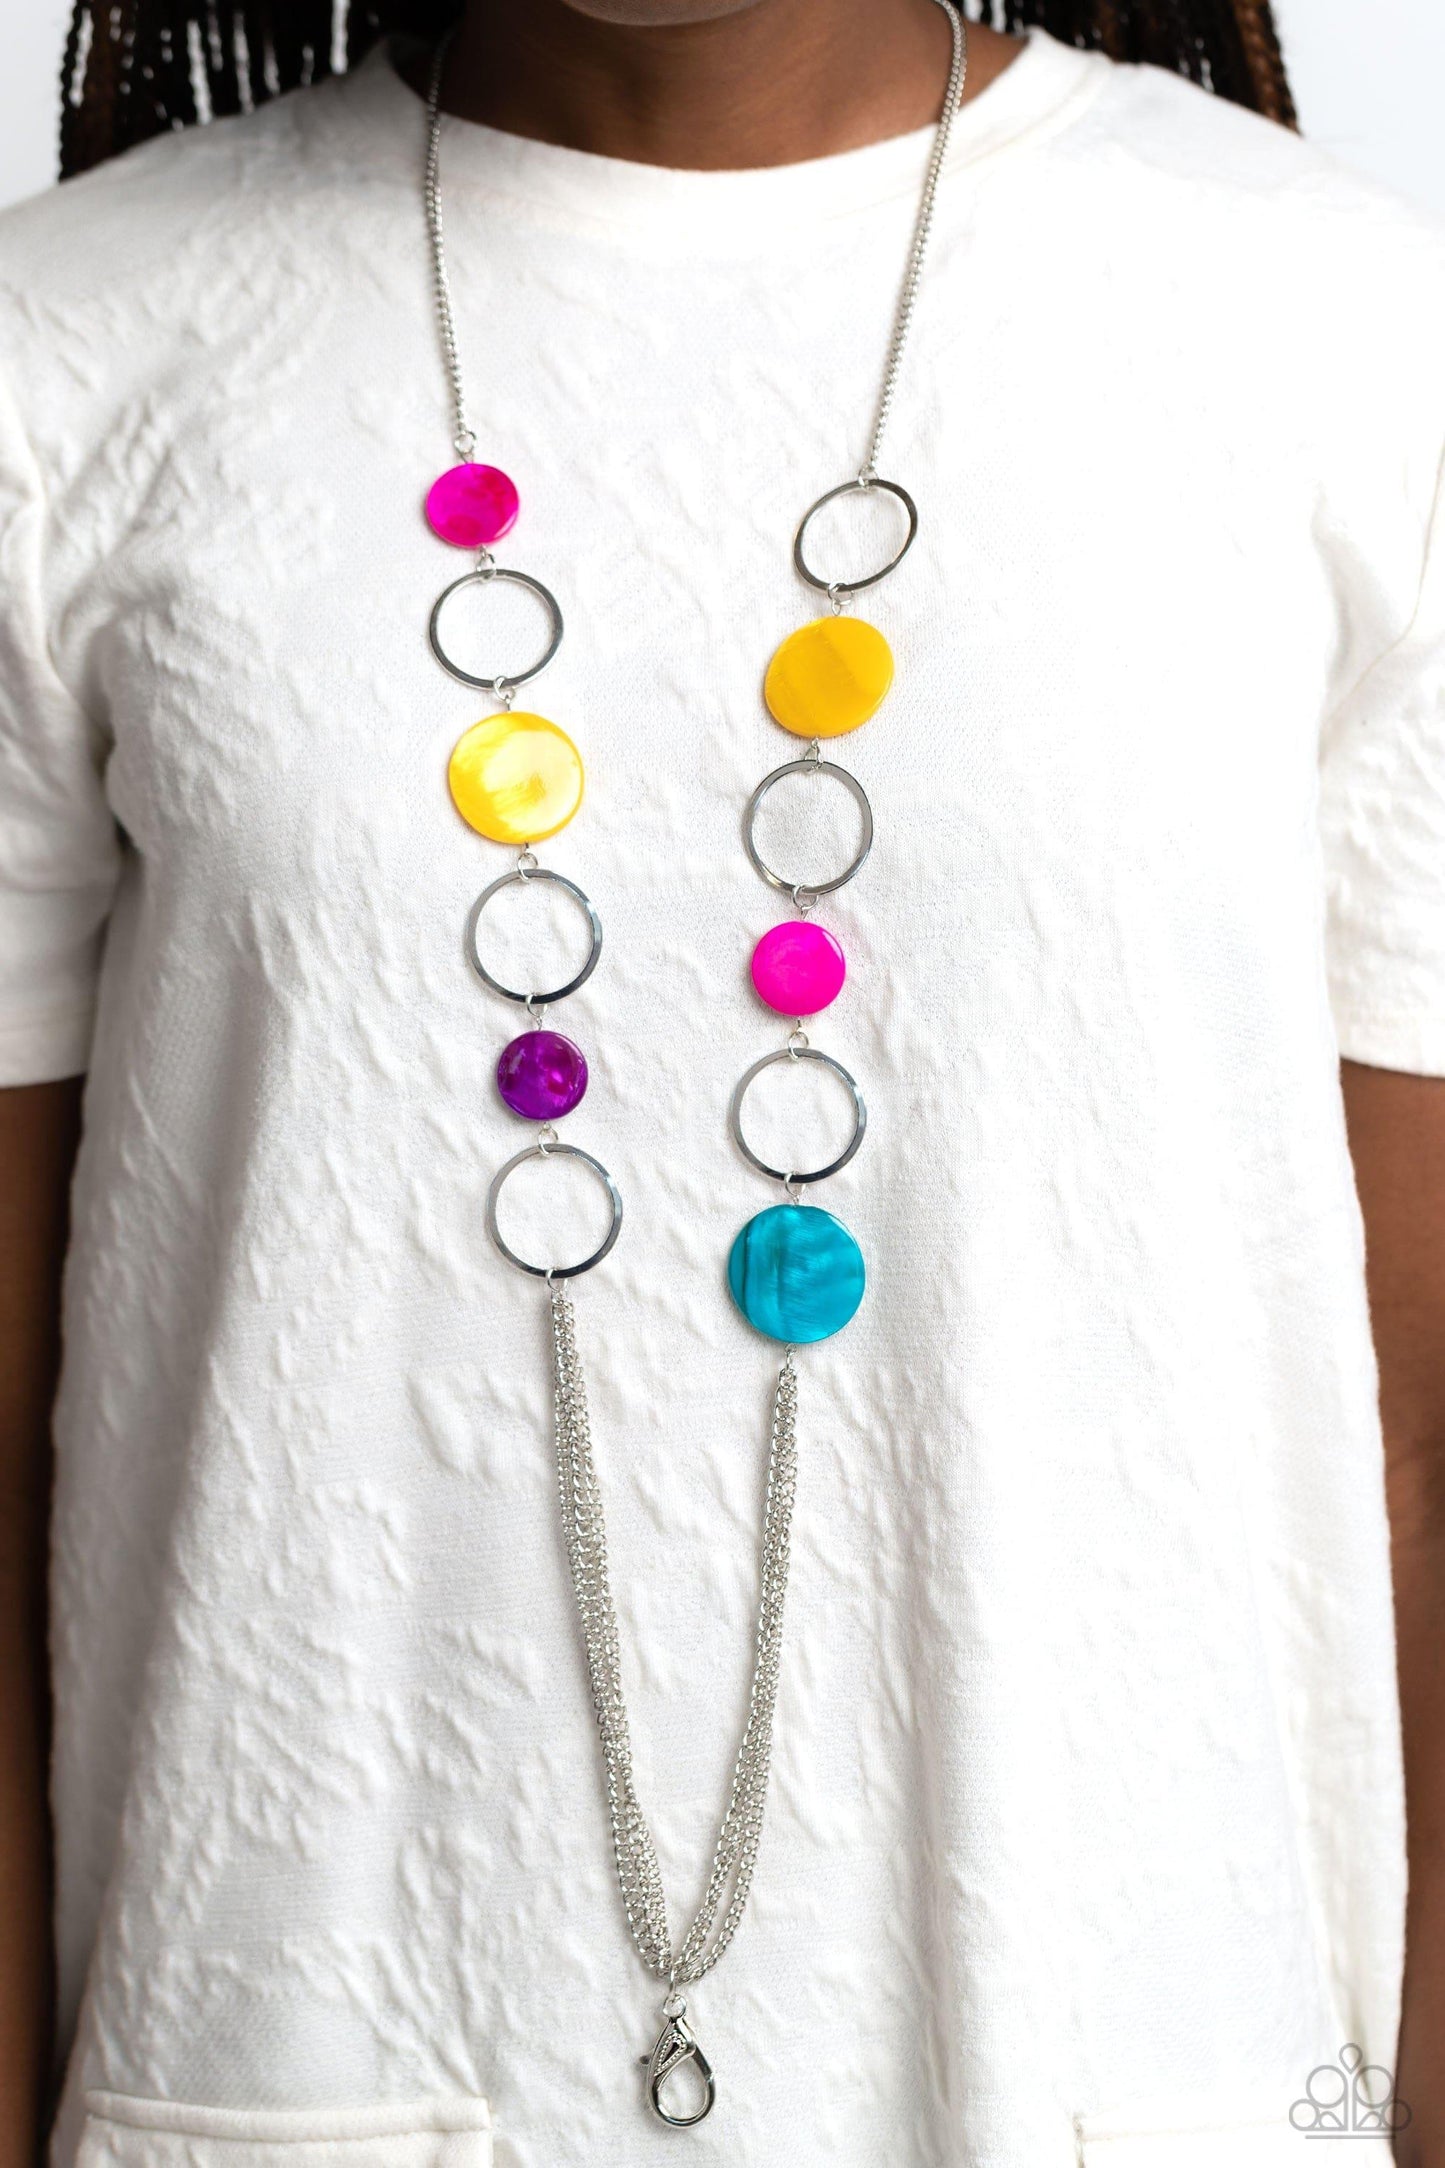 Paparazzi Accessories - Beach Hub - Multicolor Lanyard Necklace - Bling by JessieK